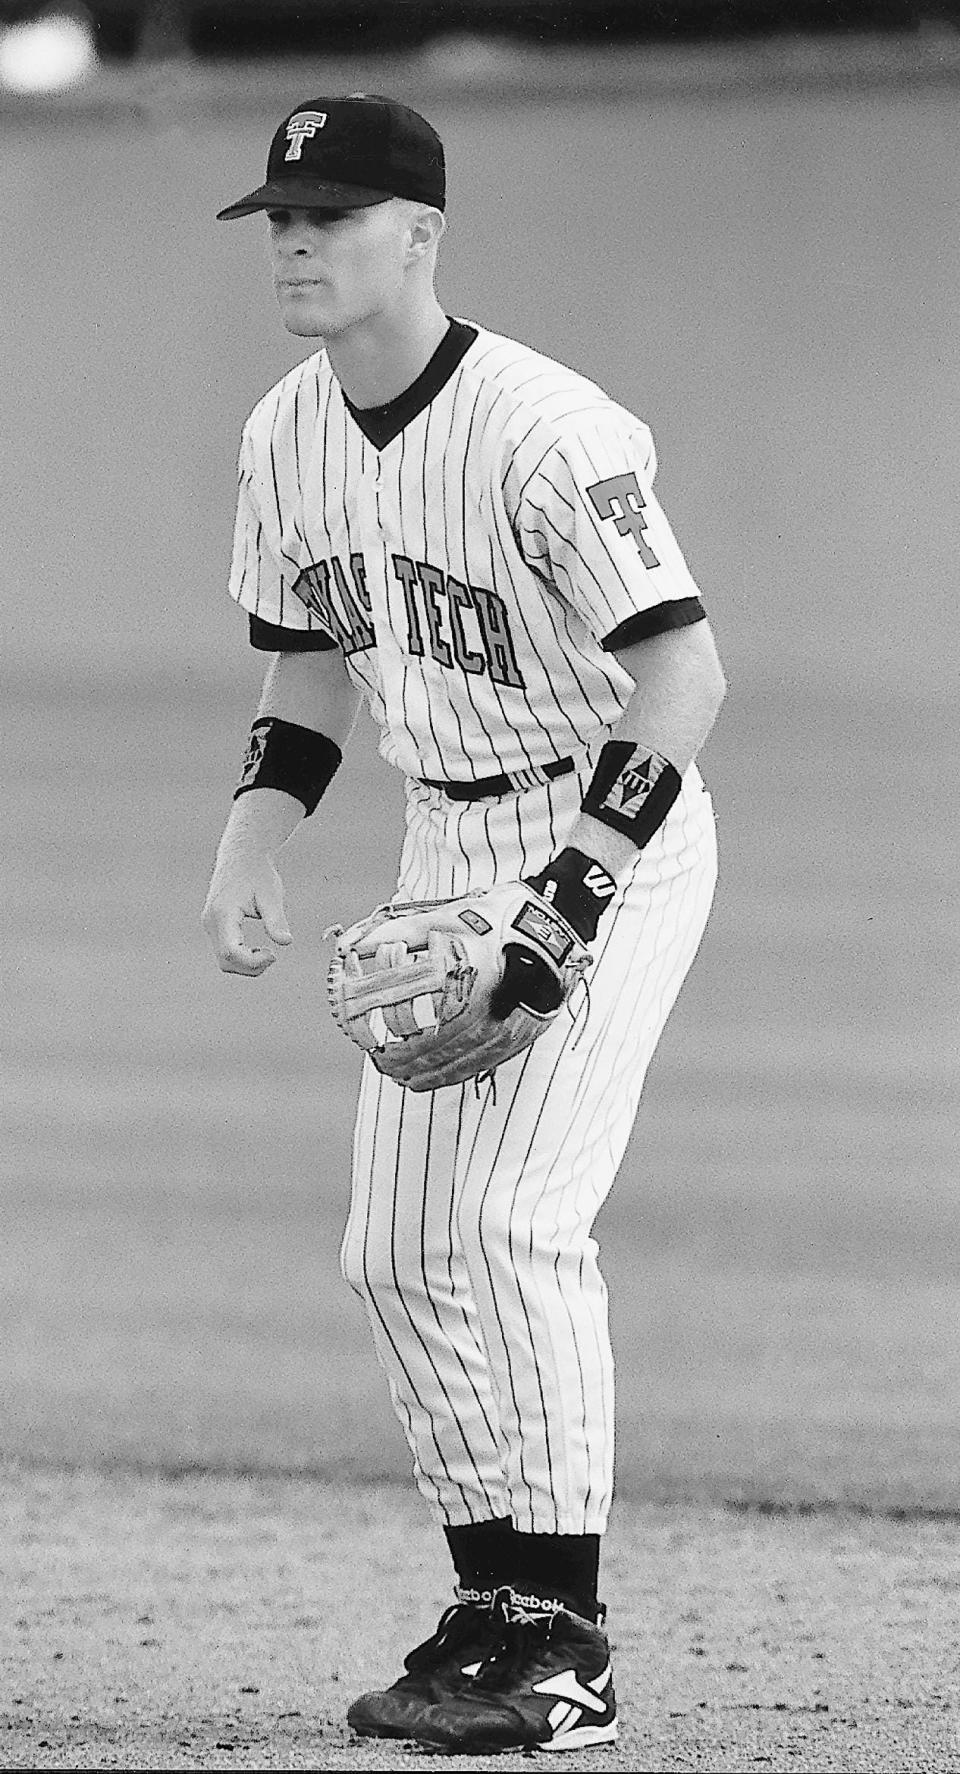 Jason Totman is the 20th member of the baseball program to be inducted into the Texas Tech Hall of Fame. The hard-hitting second baseman led the Red Raiders to a school-record 51 wins in 1995 and the Southwest Conference regular-season and tournament titles.